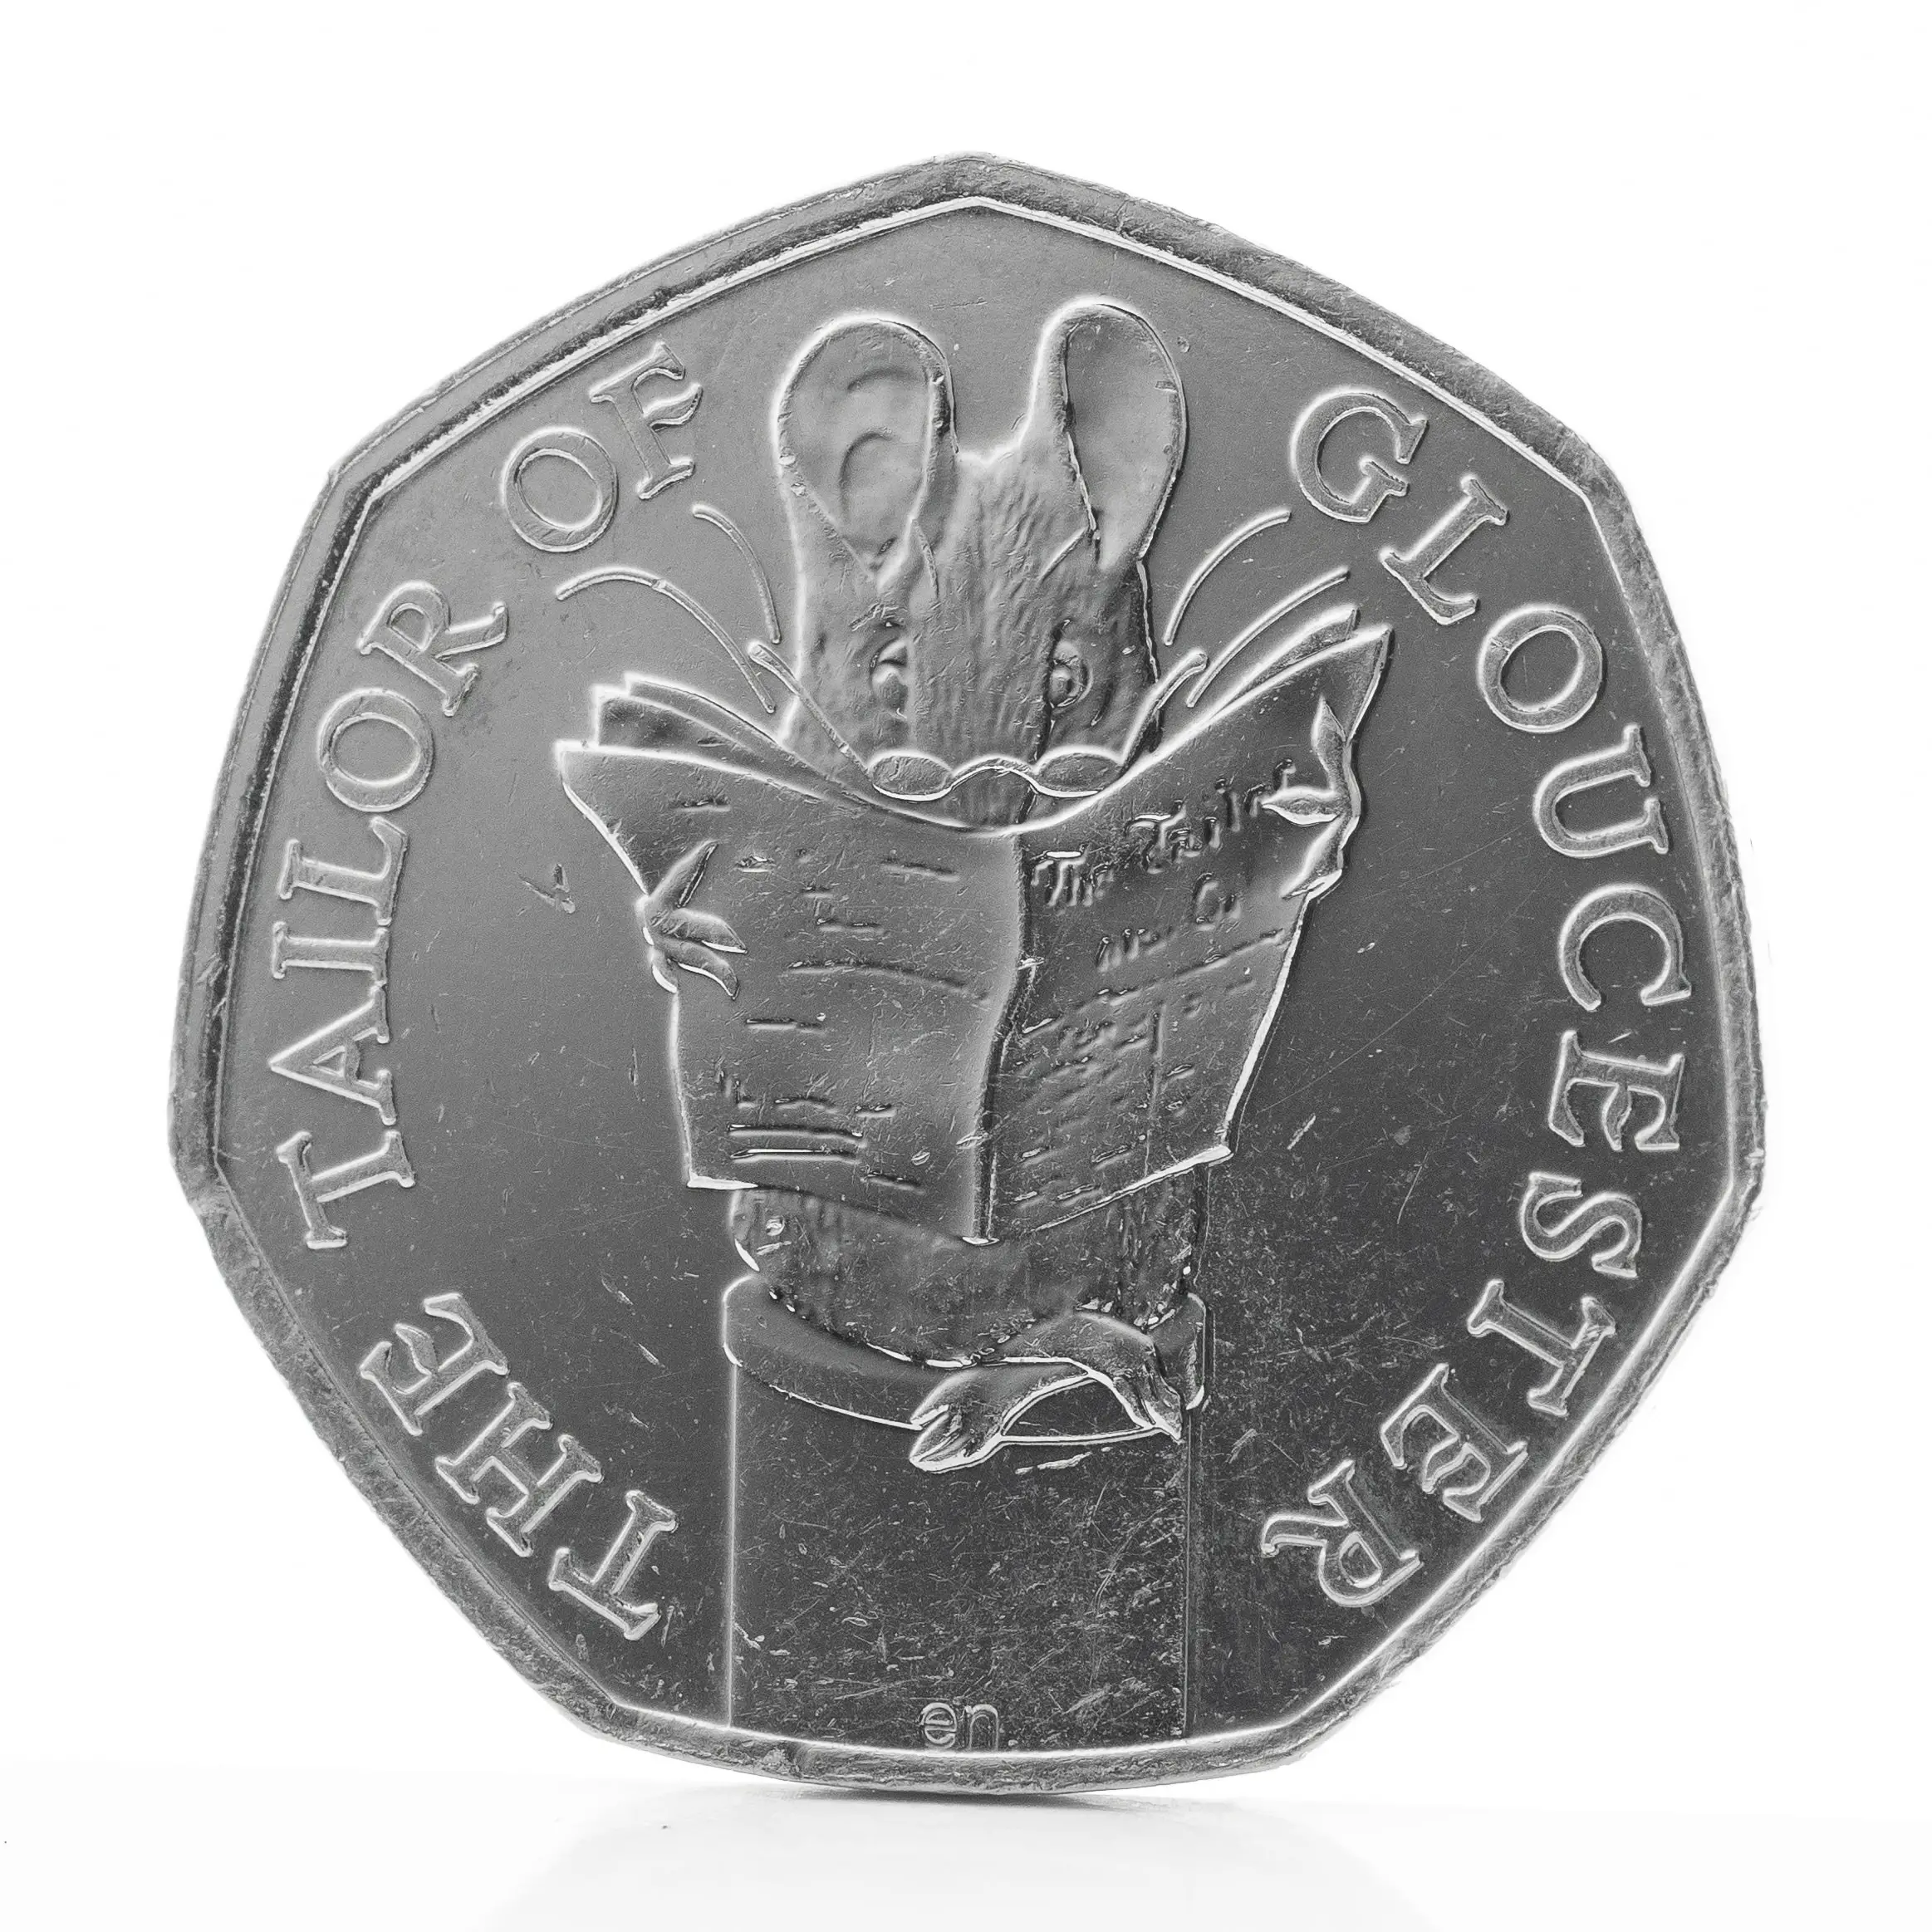 Tailor of Gloucester 50p Coin reverse